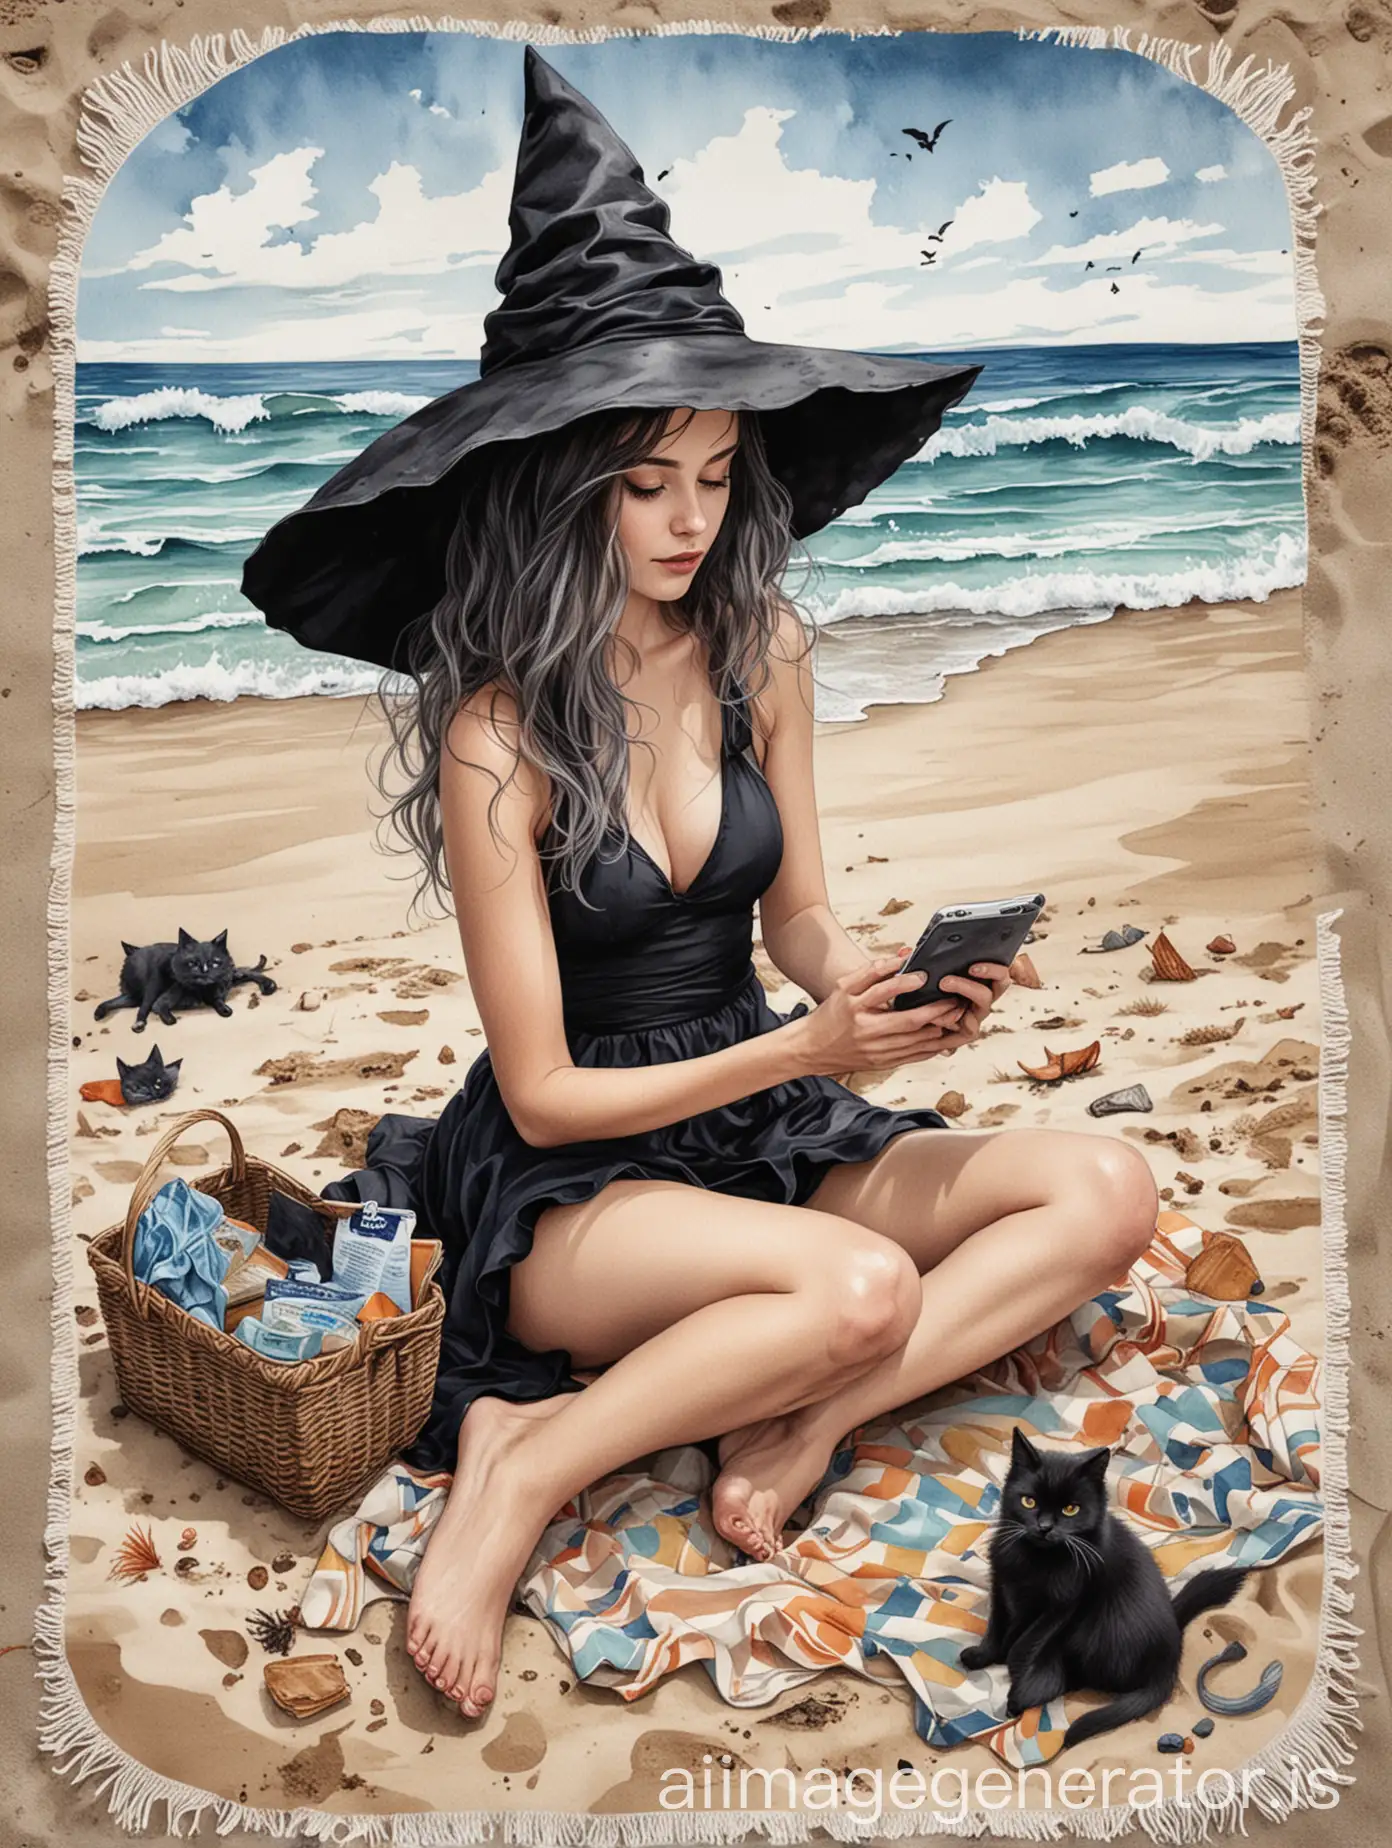 whimsical witch wearing a black bathing suit and witch hat, sitting on a funky black and white beach towel at the beach, hair blowing in the wind, looking at her iPhone, her old worn broom laying in the sand beside her, blue waves, a plate with a sandwich, a picnic basket, black cat curled up sleeping, watercolor and ink, textured painterly fantasy, alcohol ink.